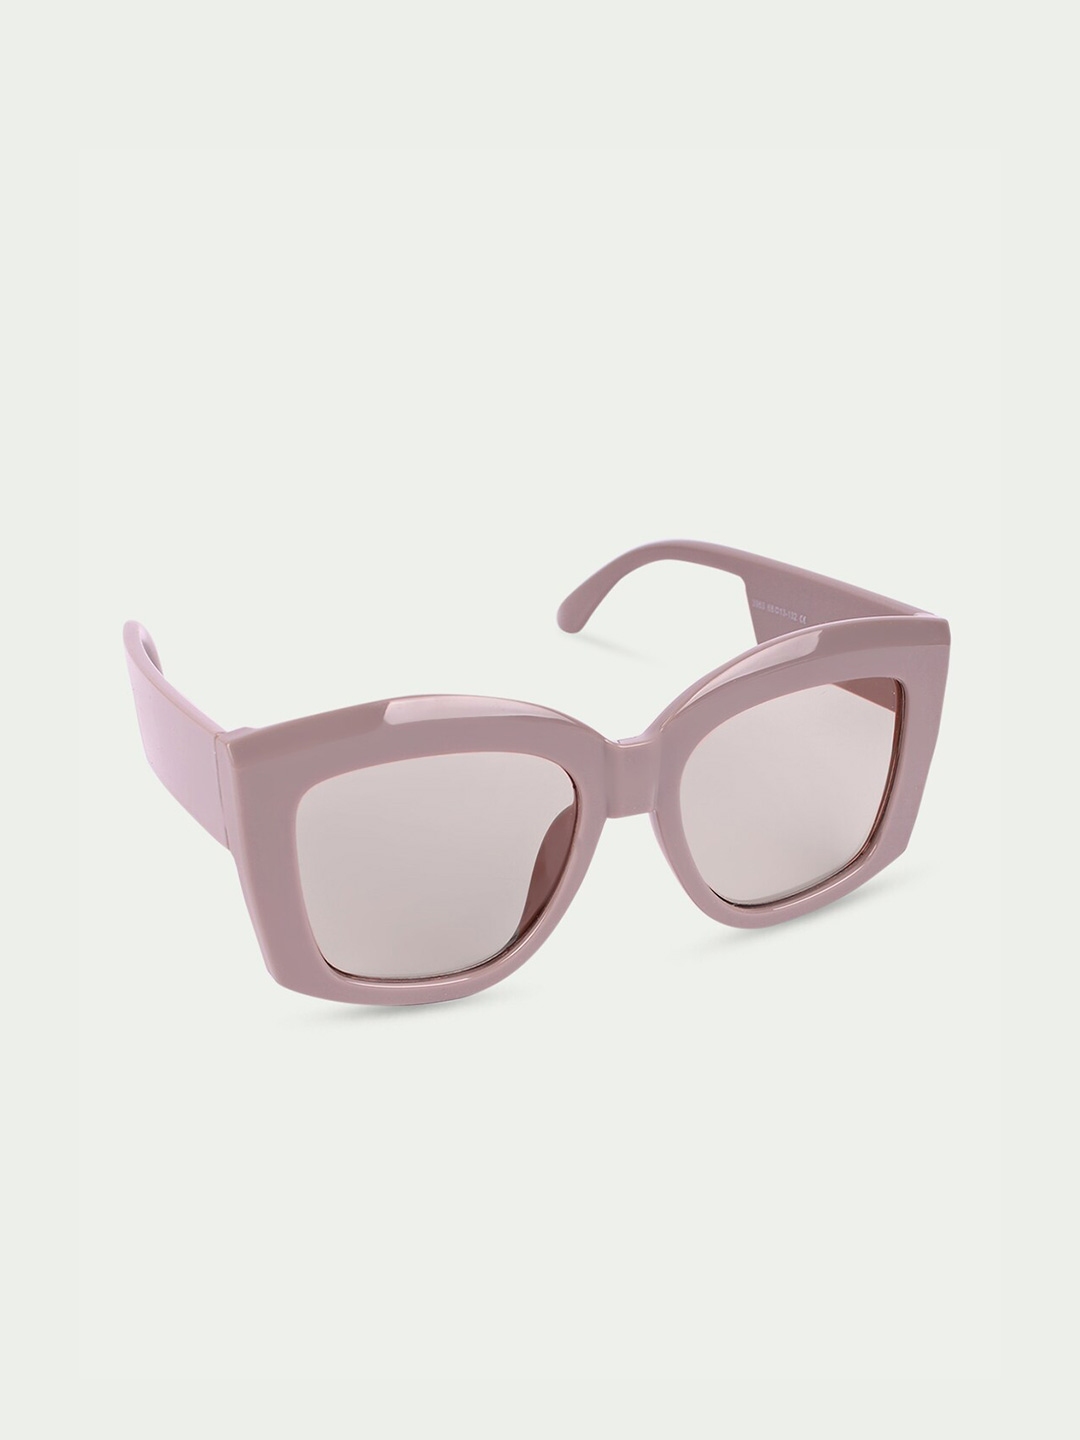 Buy Quirky Unisex Grey Lens Pink Oversized Sunglasses With Uv Protected Lens Sunglasses For